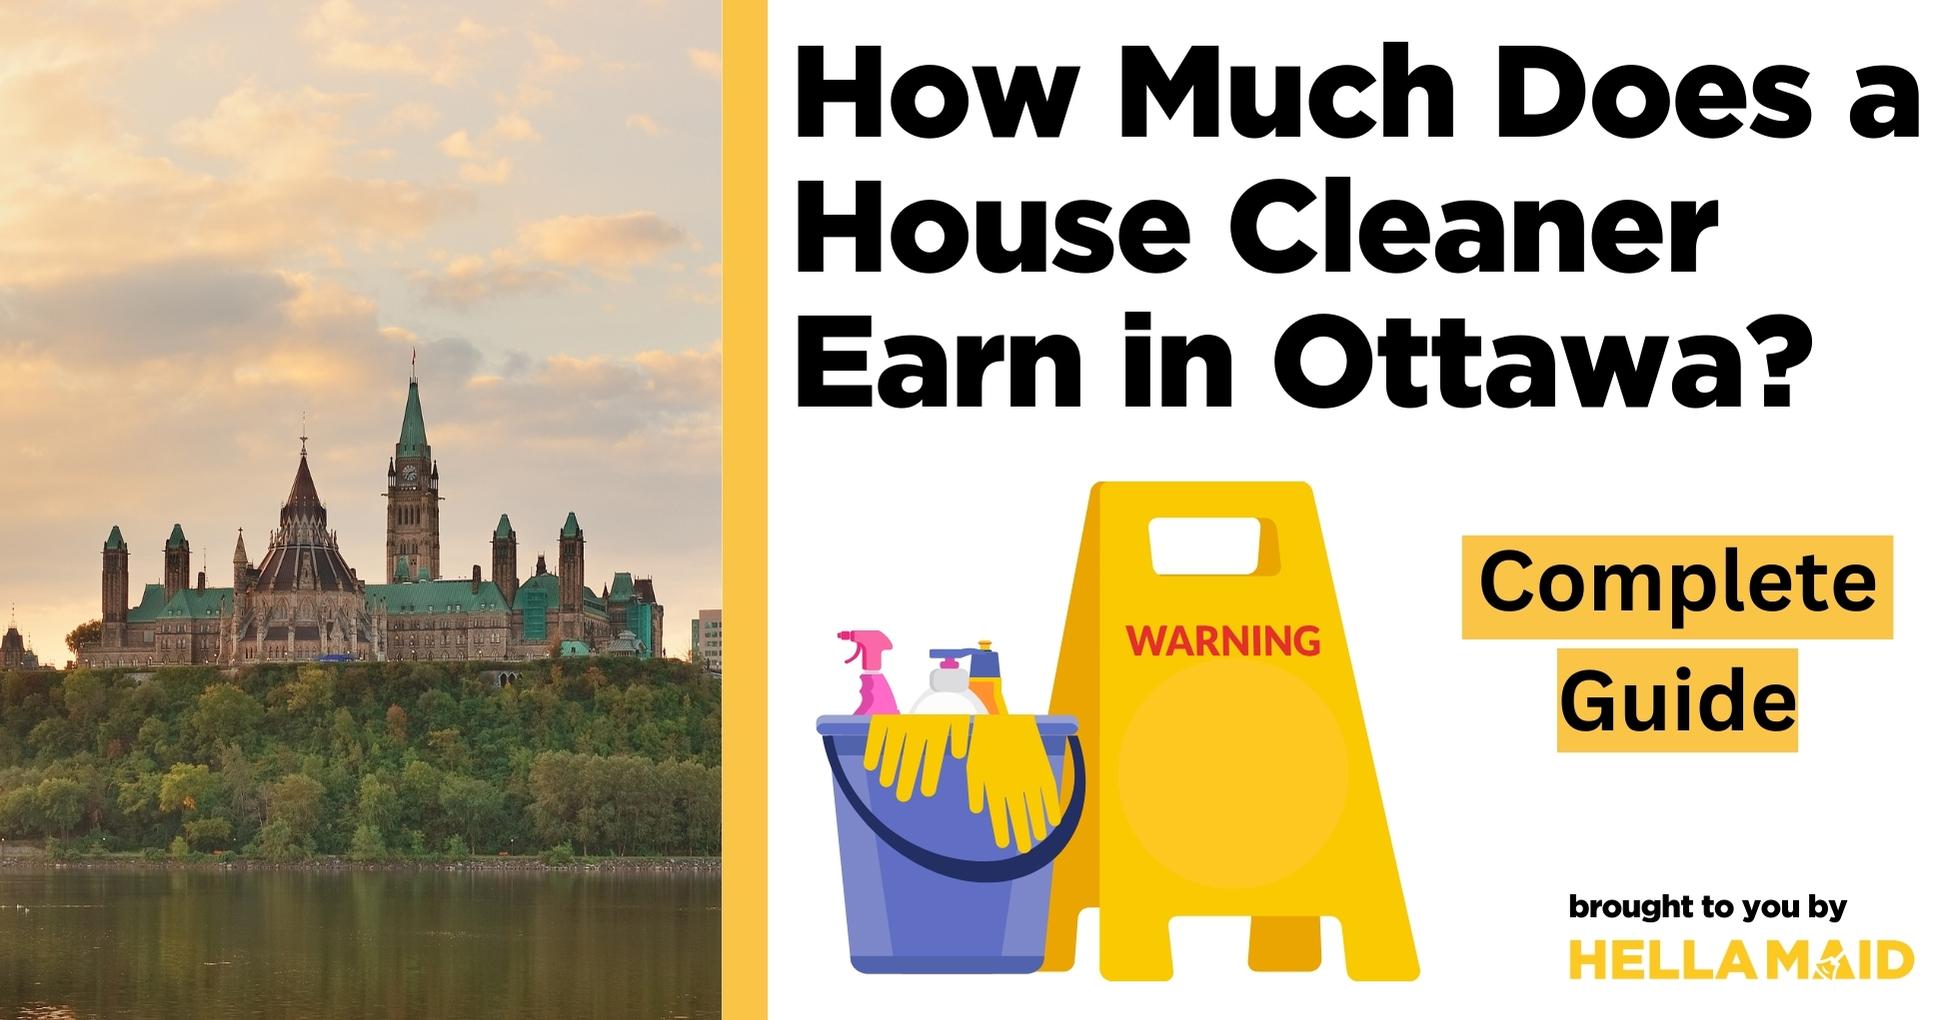 how much does house cleaner earn ottawa